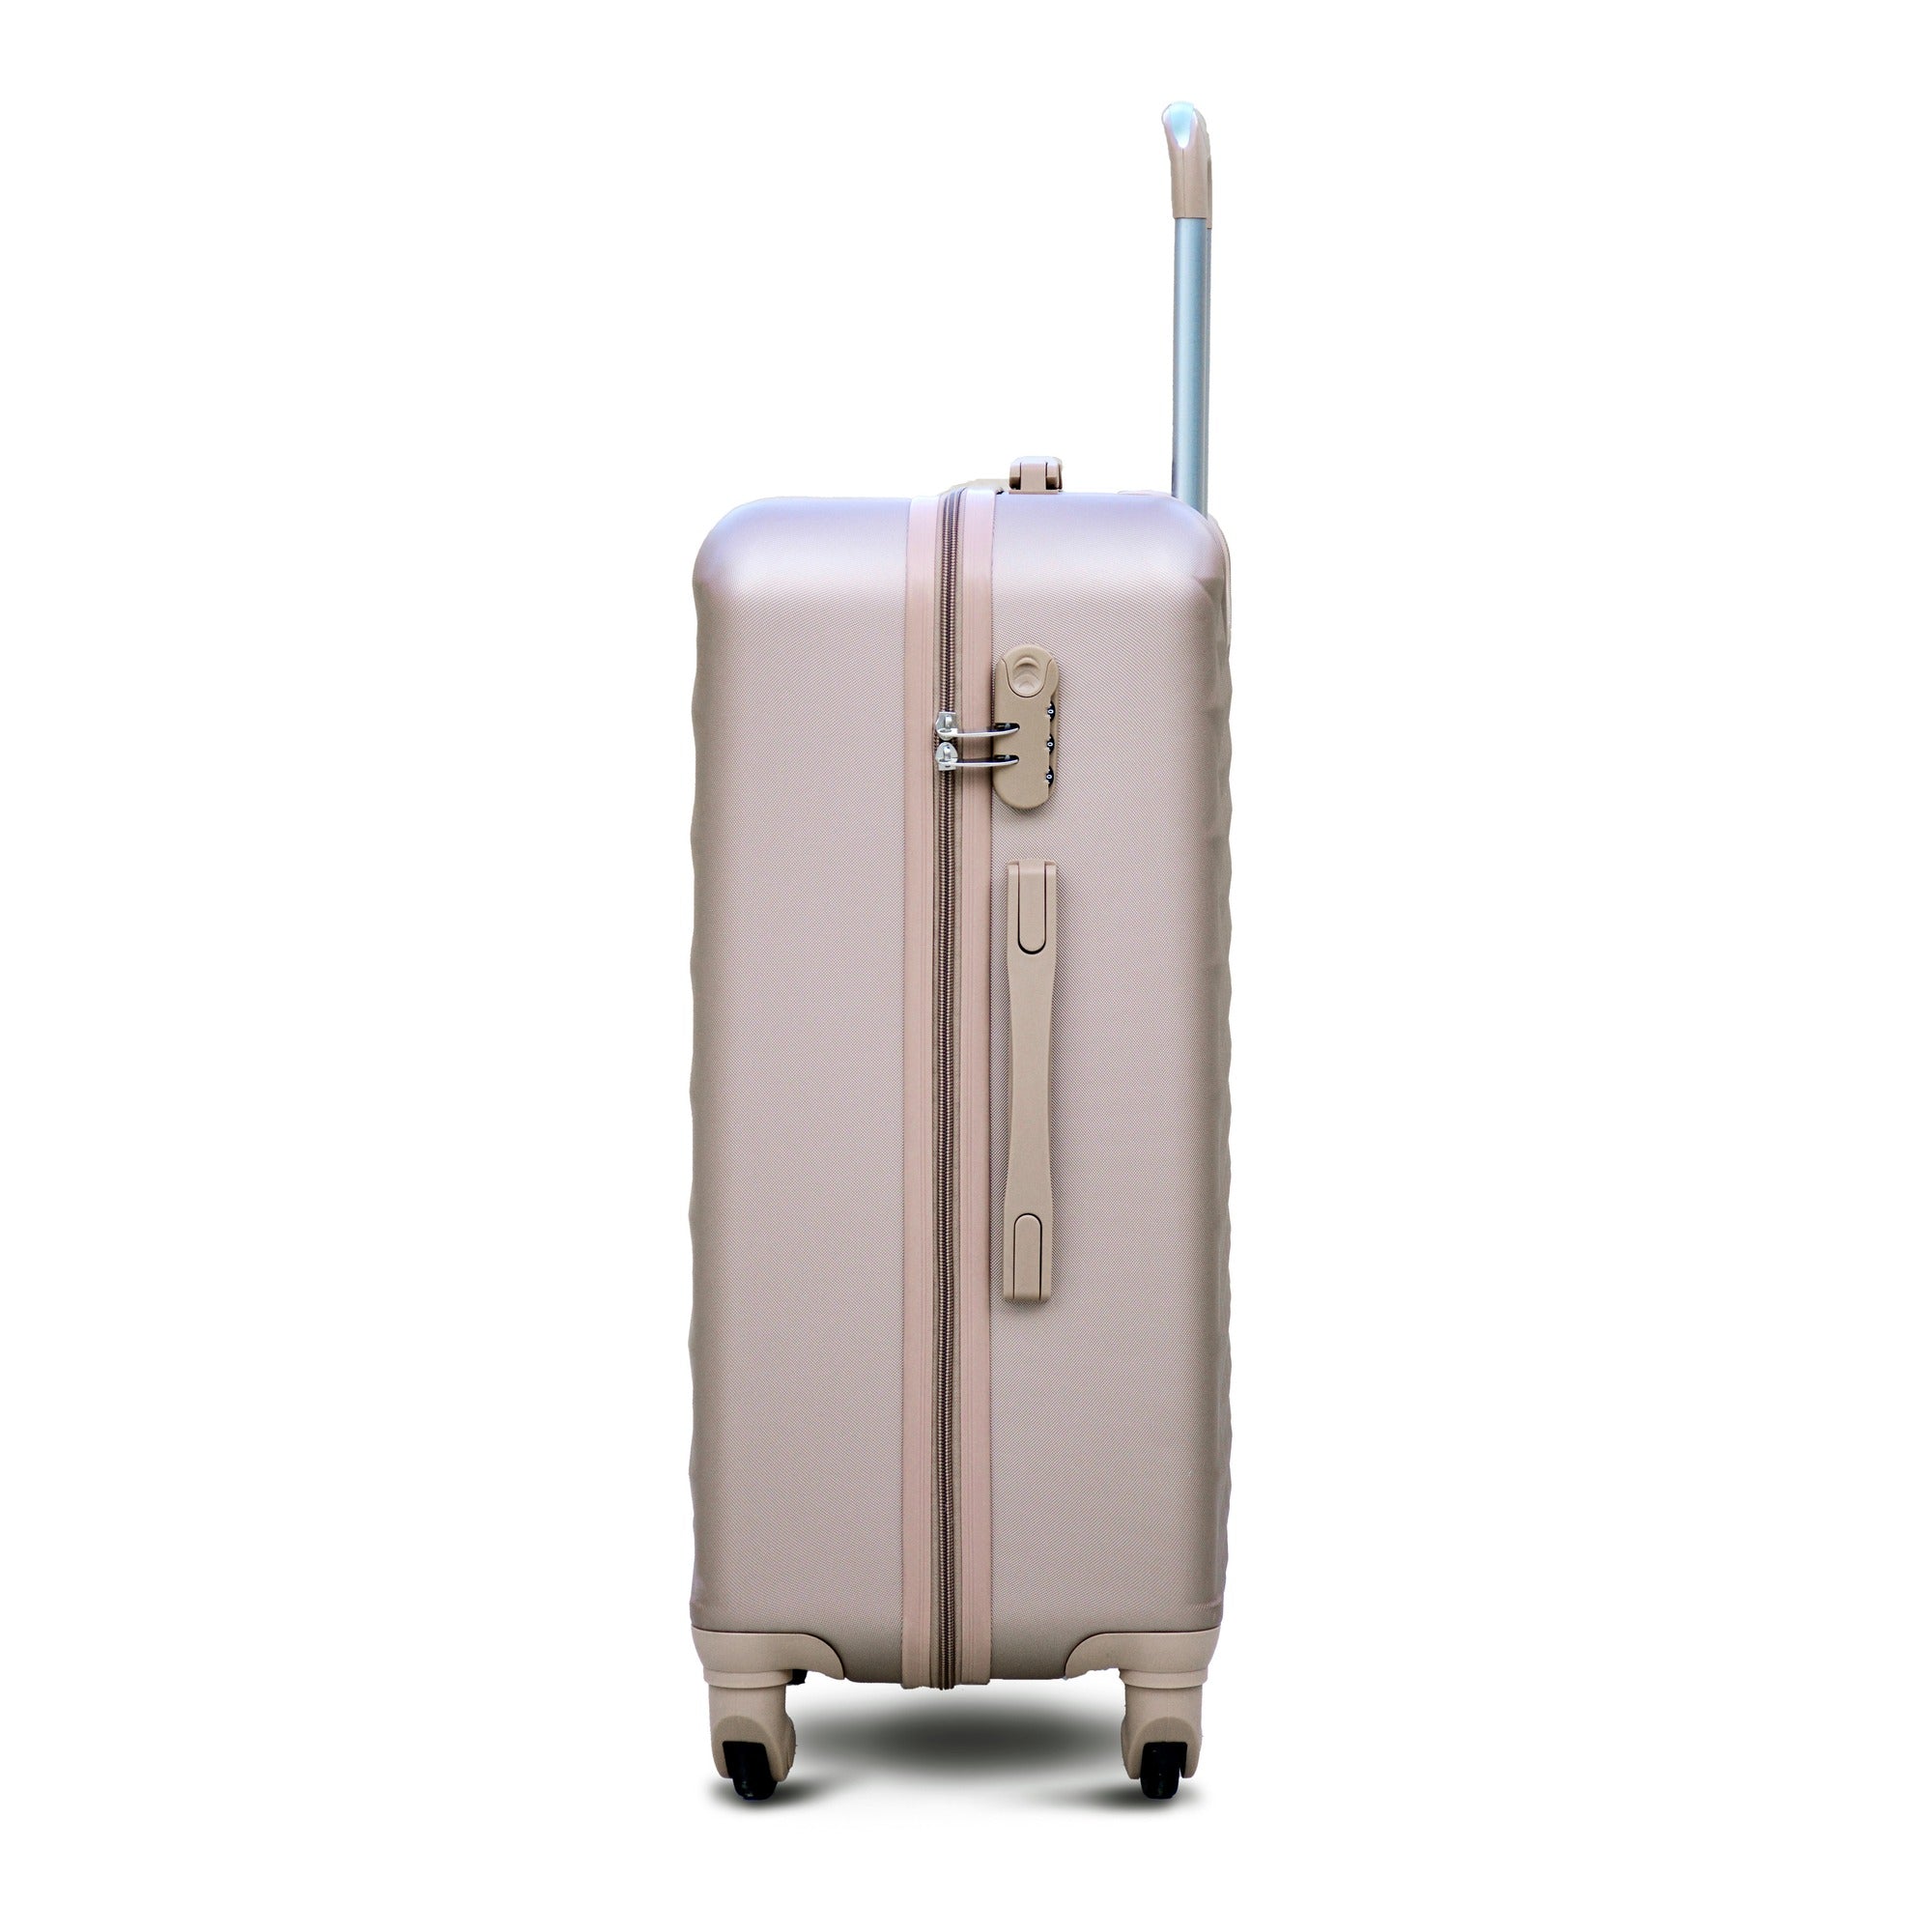 24" Gold Colour Diamond Cut ABS Lightweight Luggage Bag with Spinner Wheel